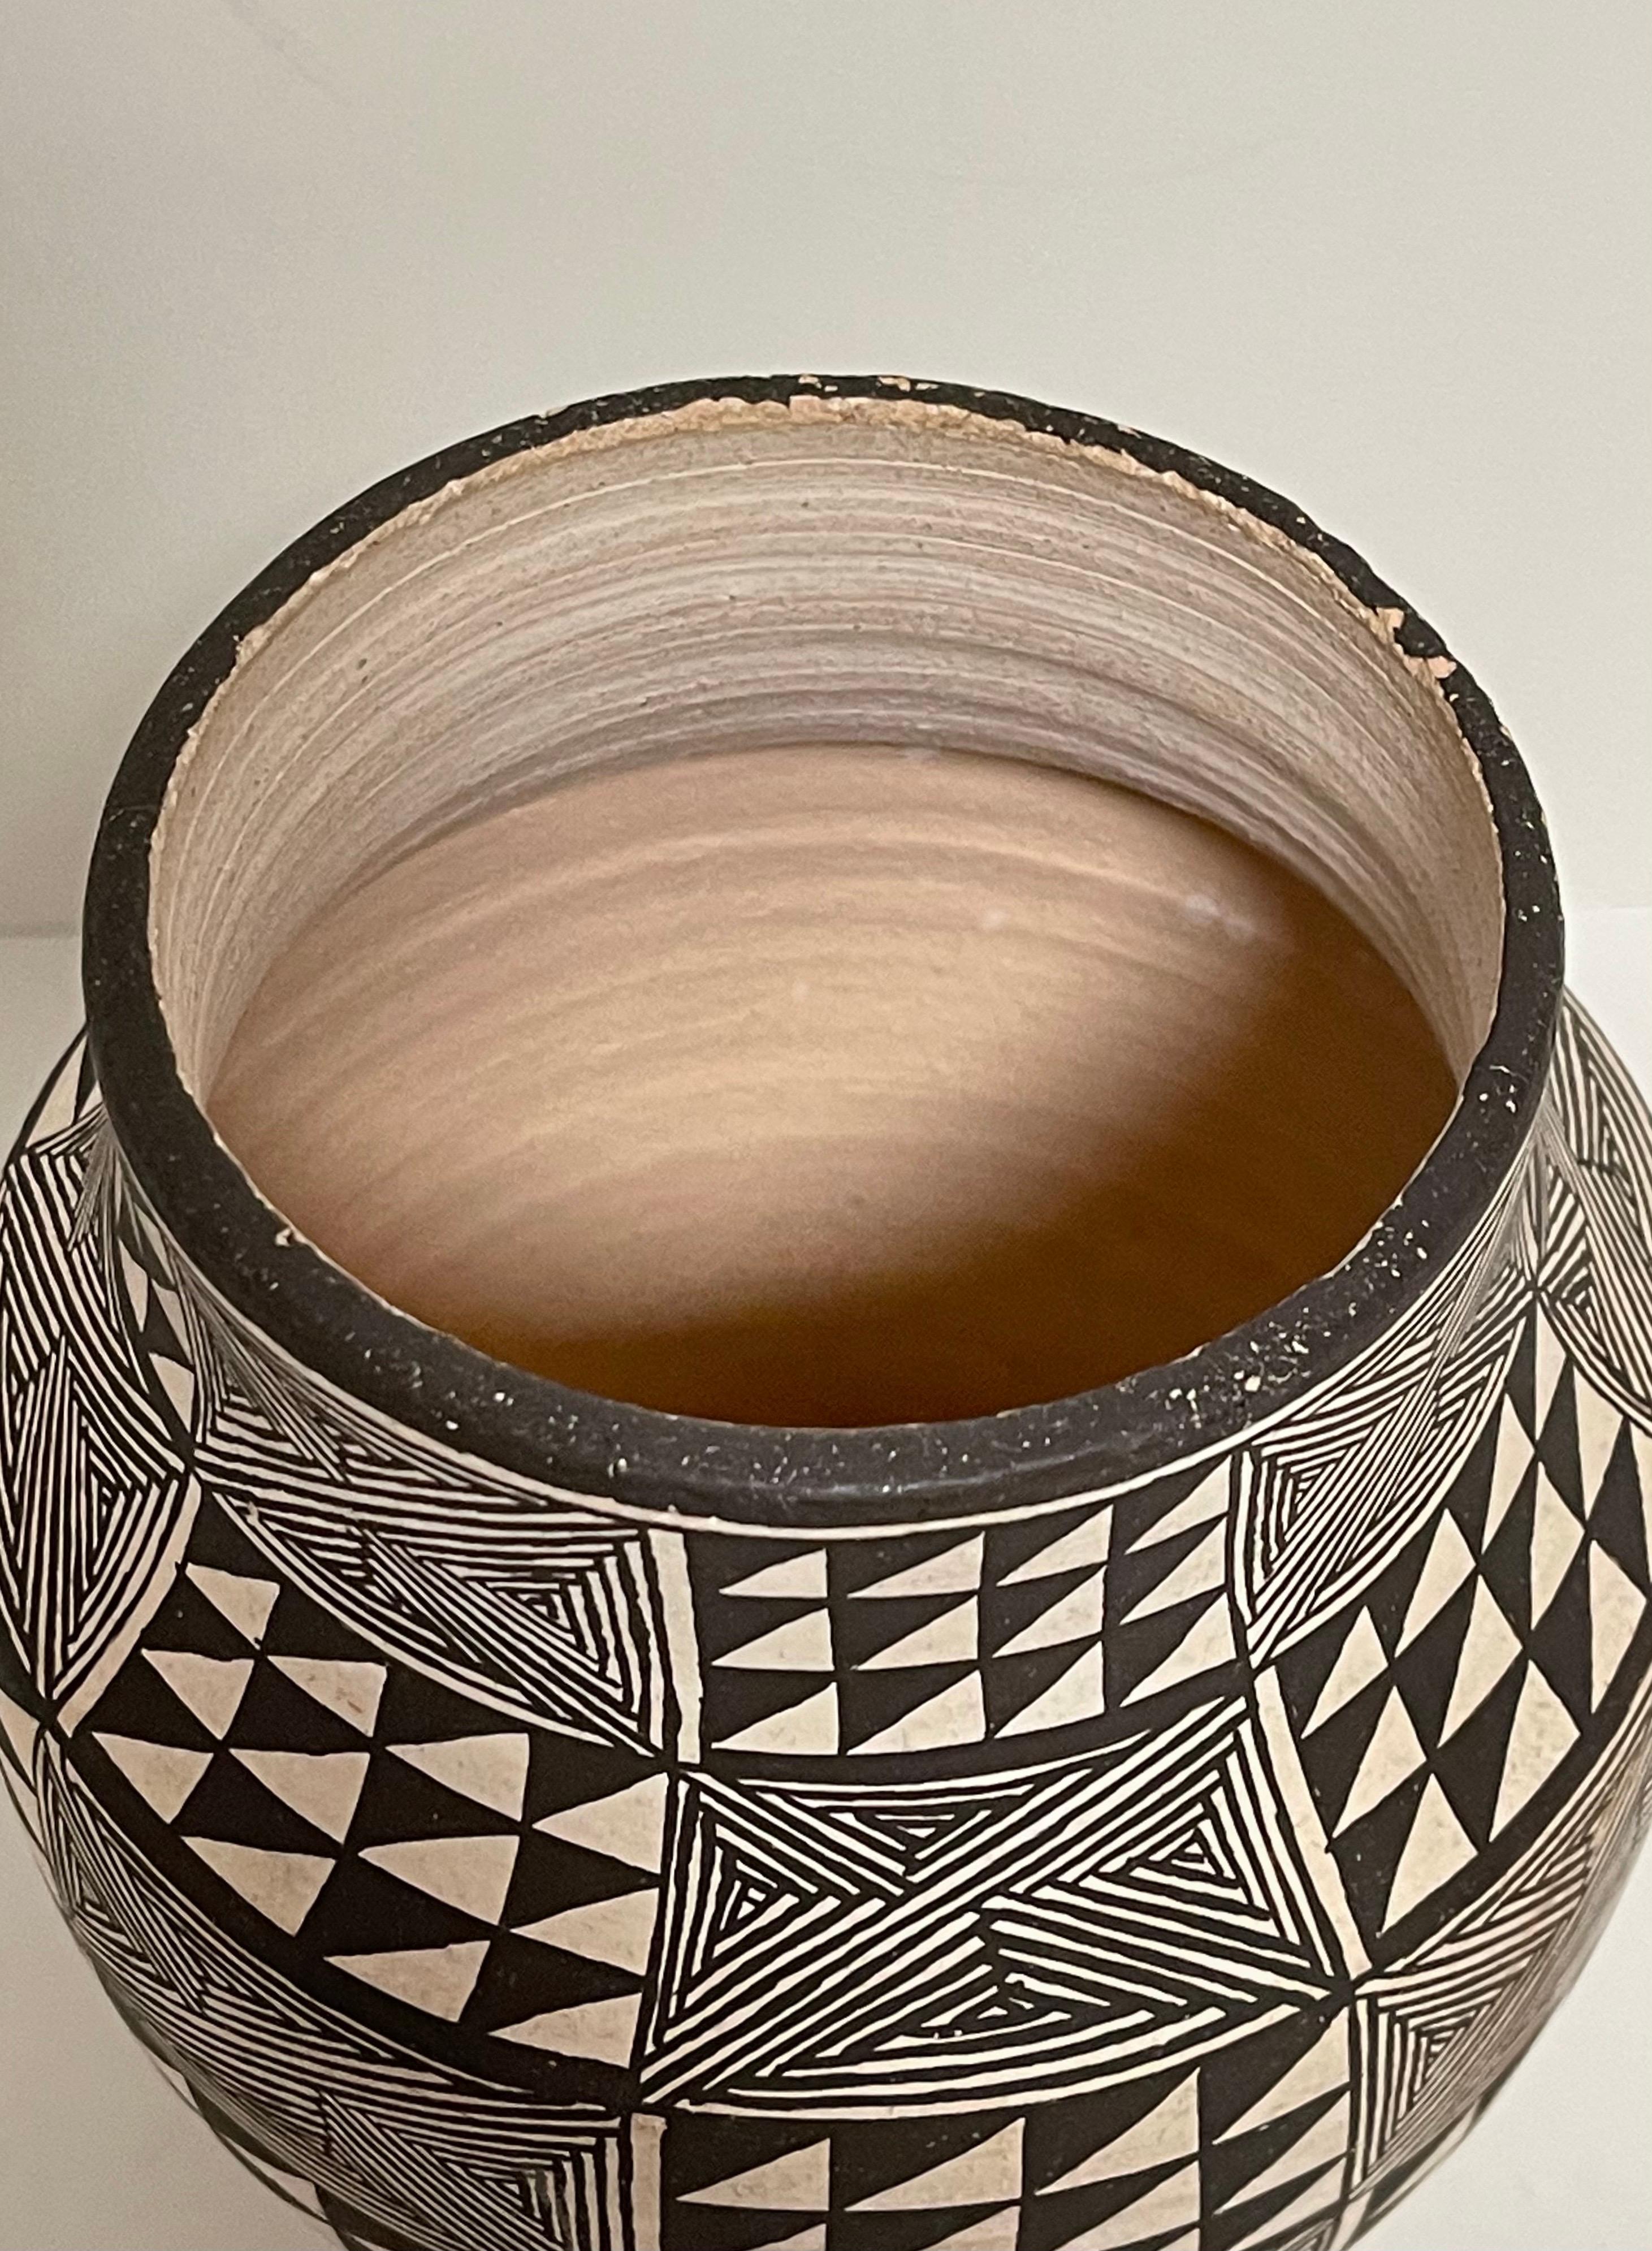 Lucy Lewis signed Acoma pottery vessel in a geometric pattern. Dated 1984. In good condition with some roughness and nicks along the top rim. Measures: 7 inches tall and approximately 6 inches in diameter.